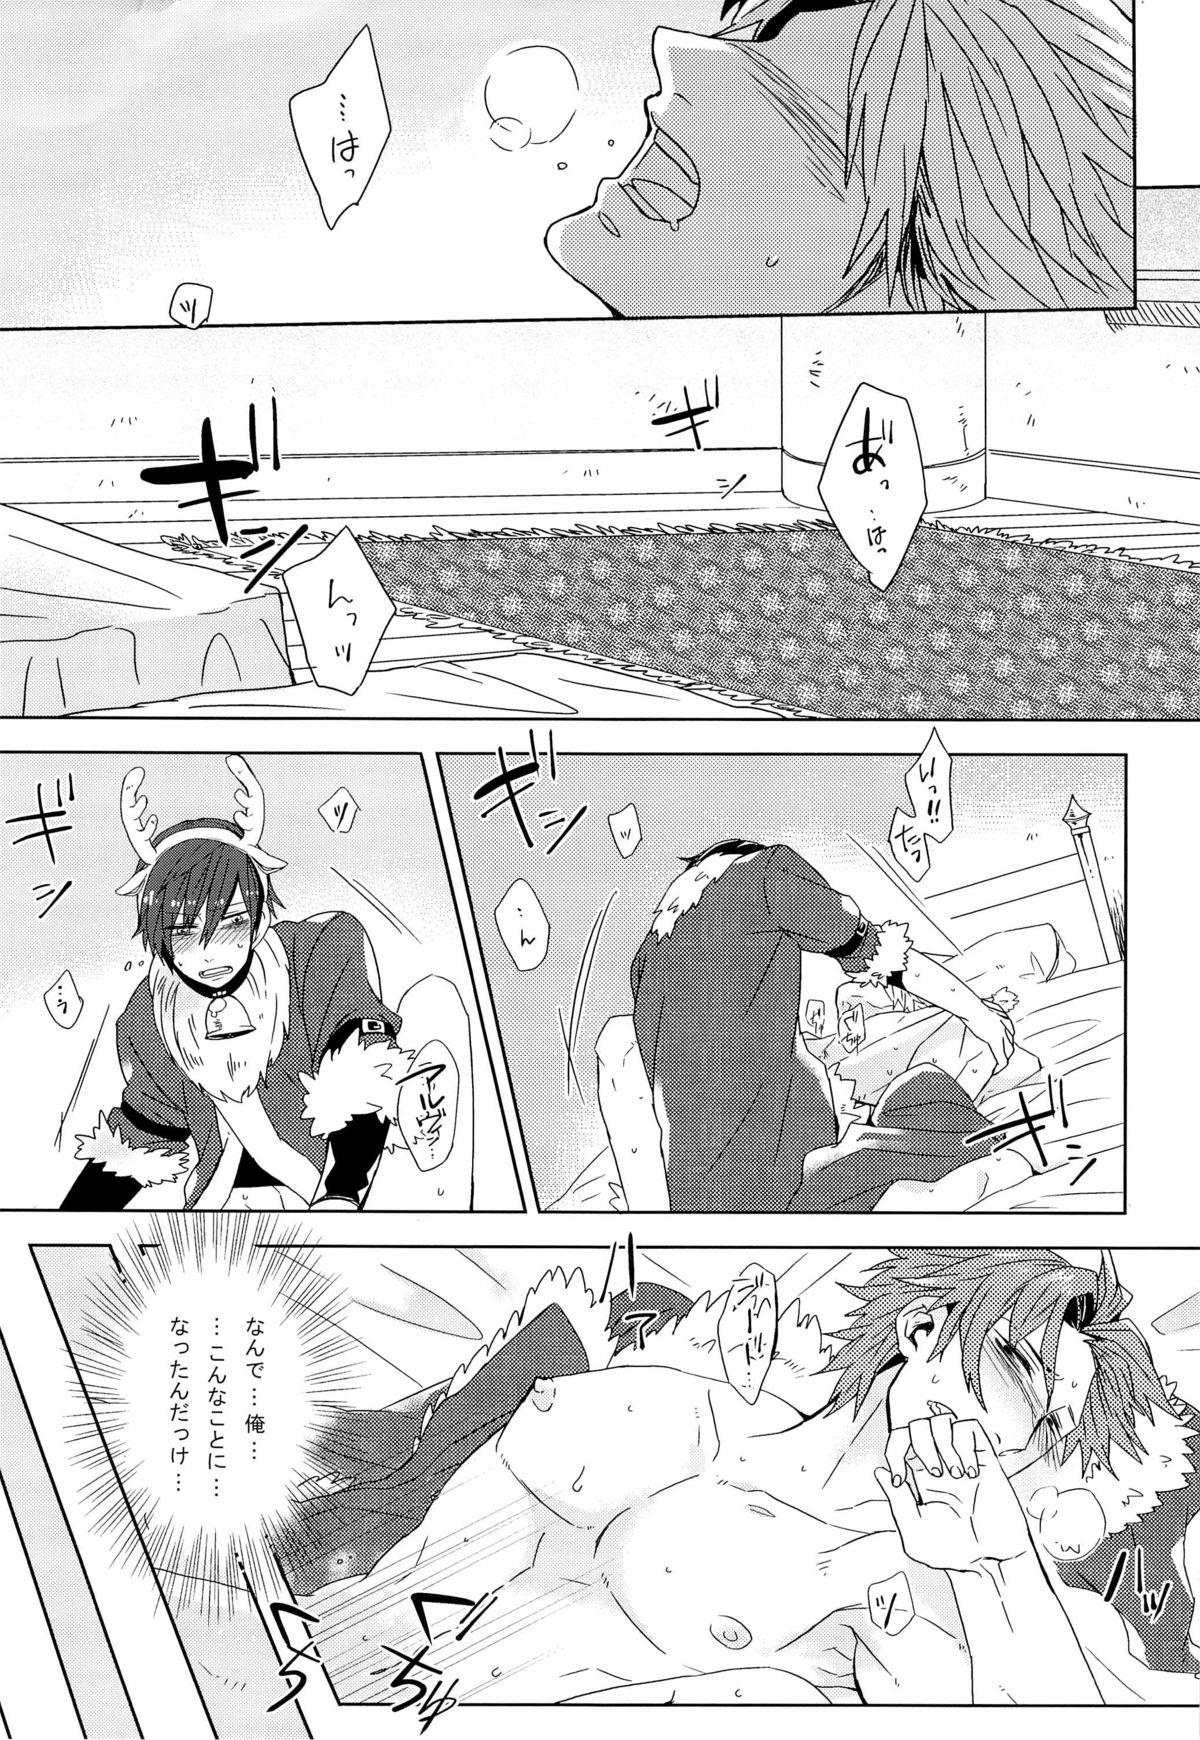 Petite Teen Merry Christmas! - Tales of xillia Tales of Tgirls - Page 7